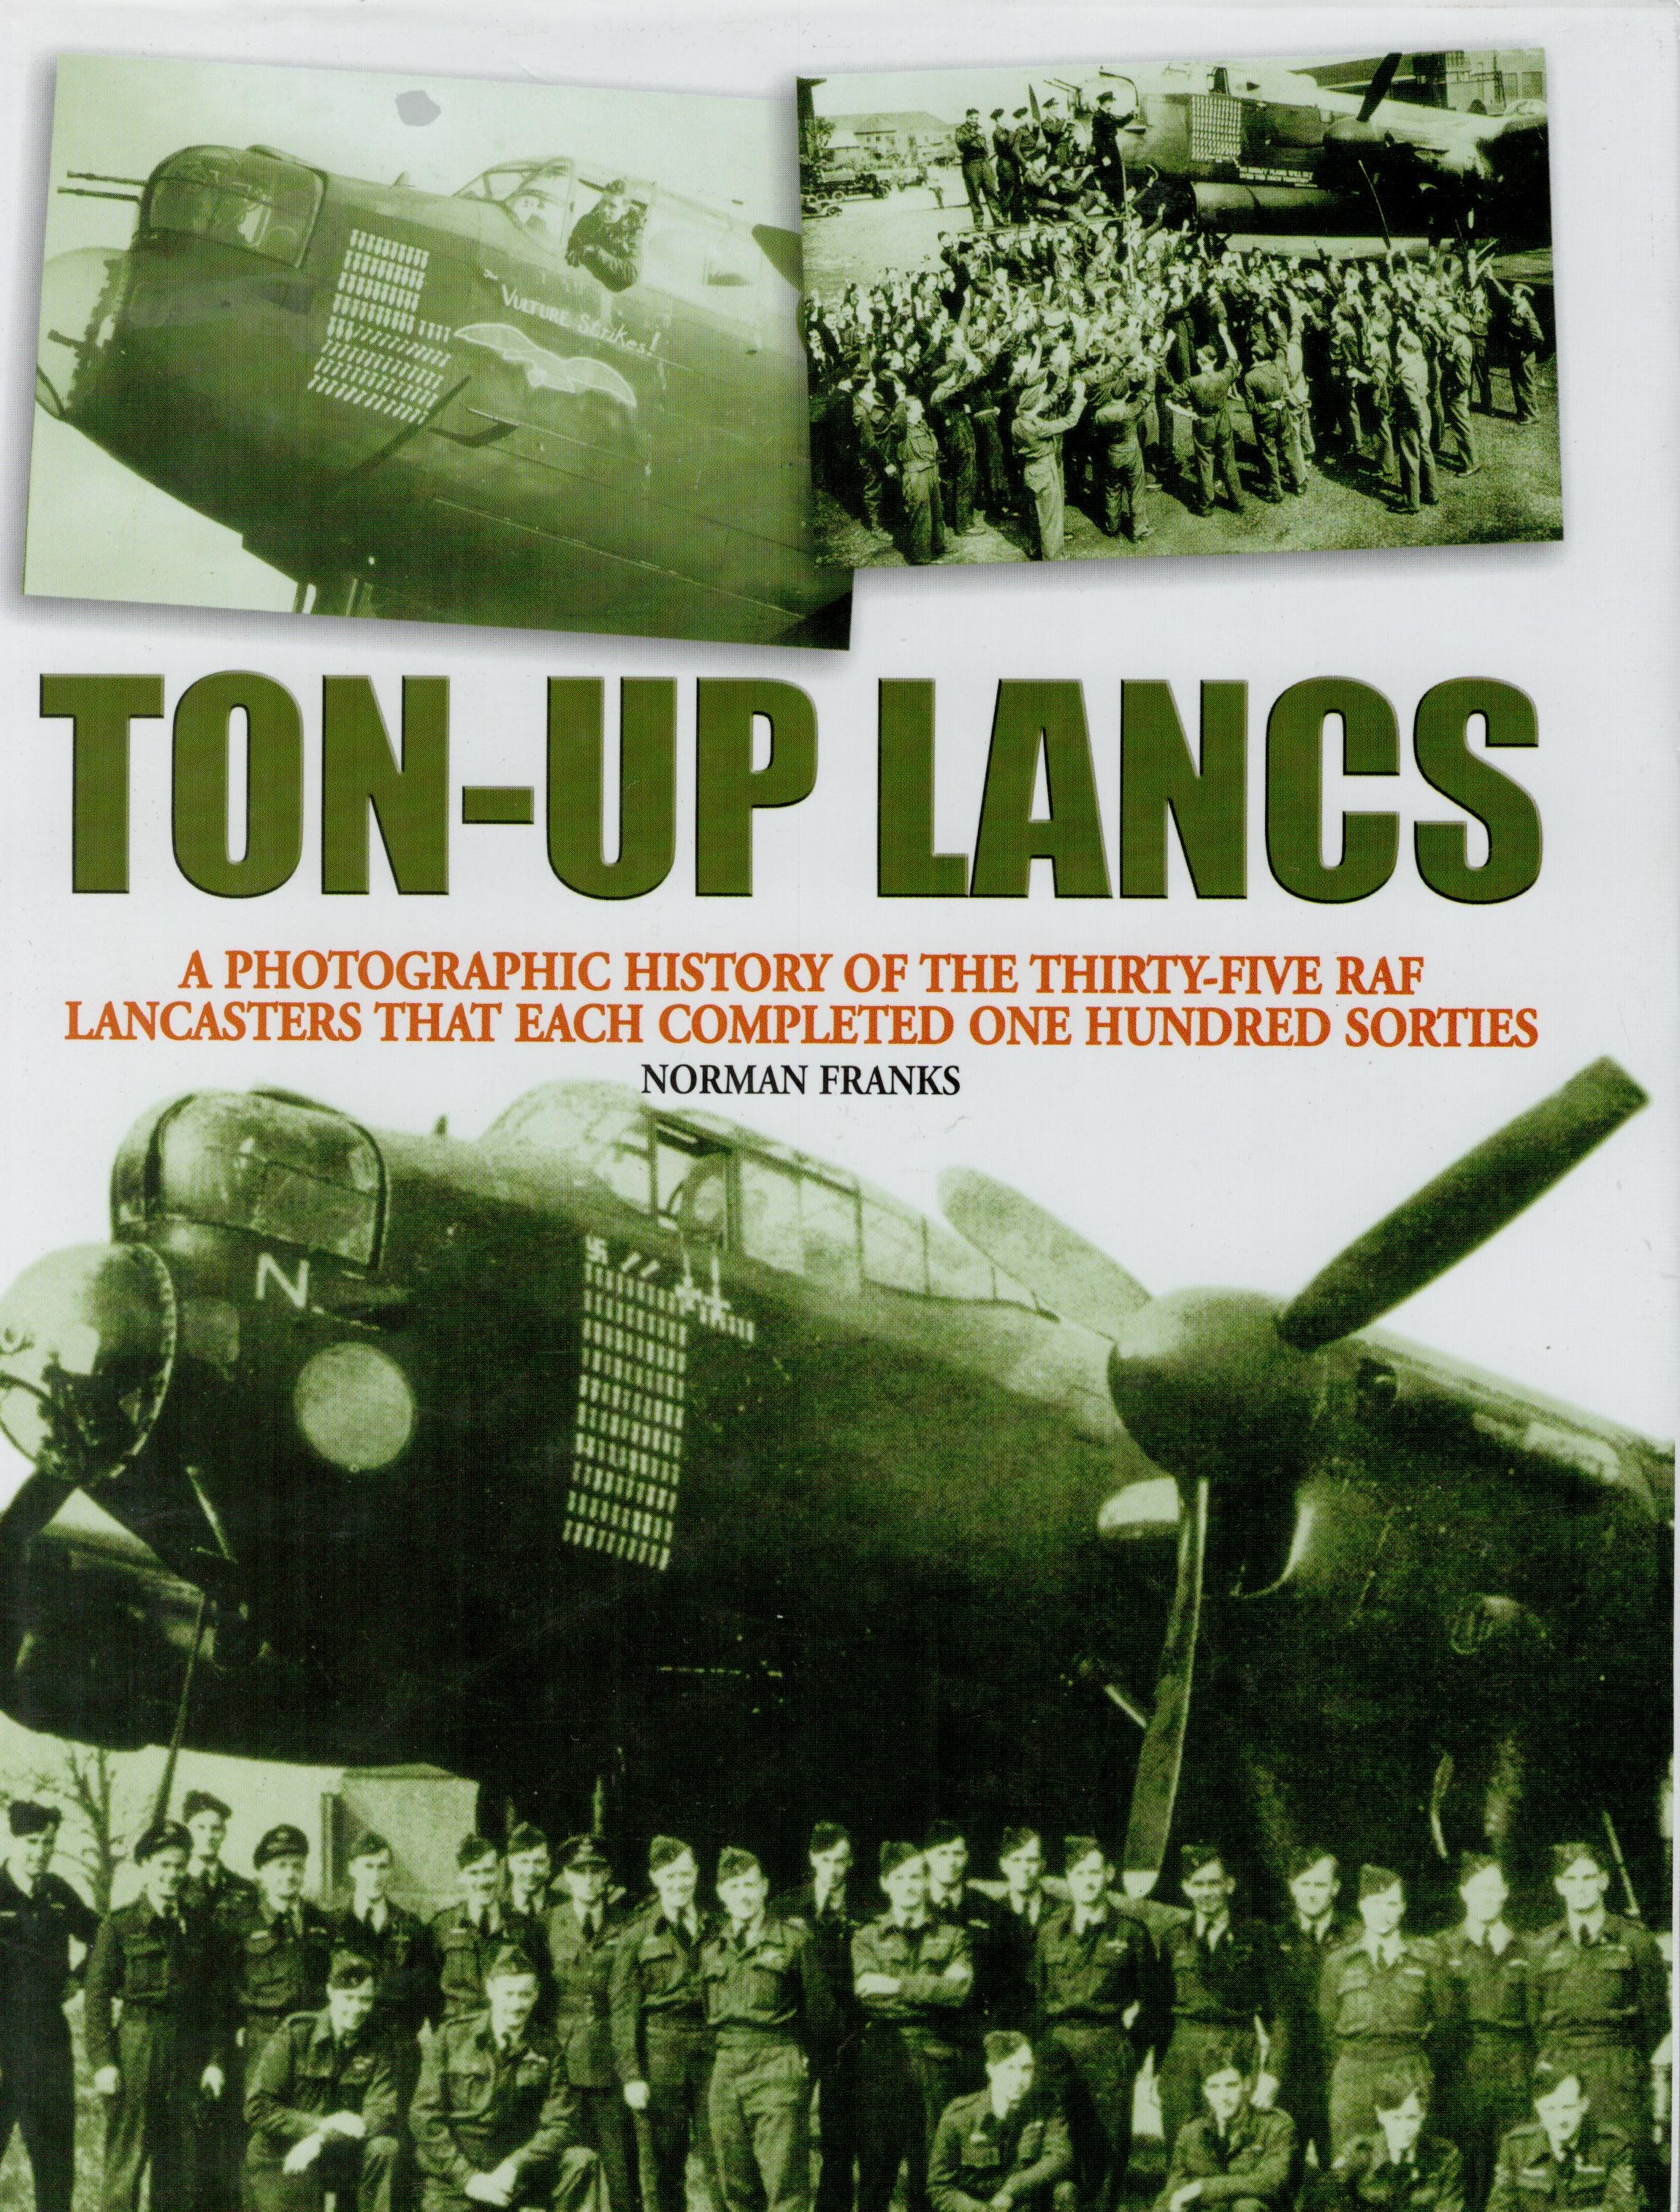 Ton Up Lancs 1st Edition Hardback Book By Norman Franks. Published in 2005. Spine and Dust Jacket in